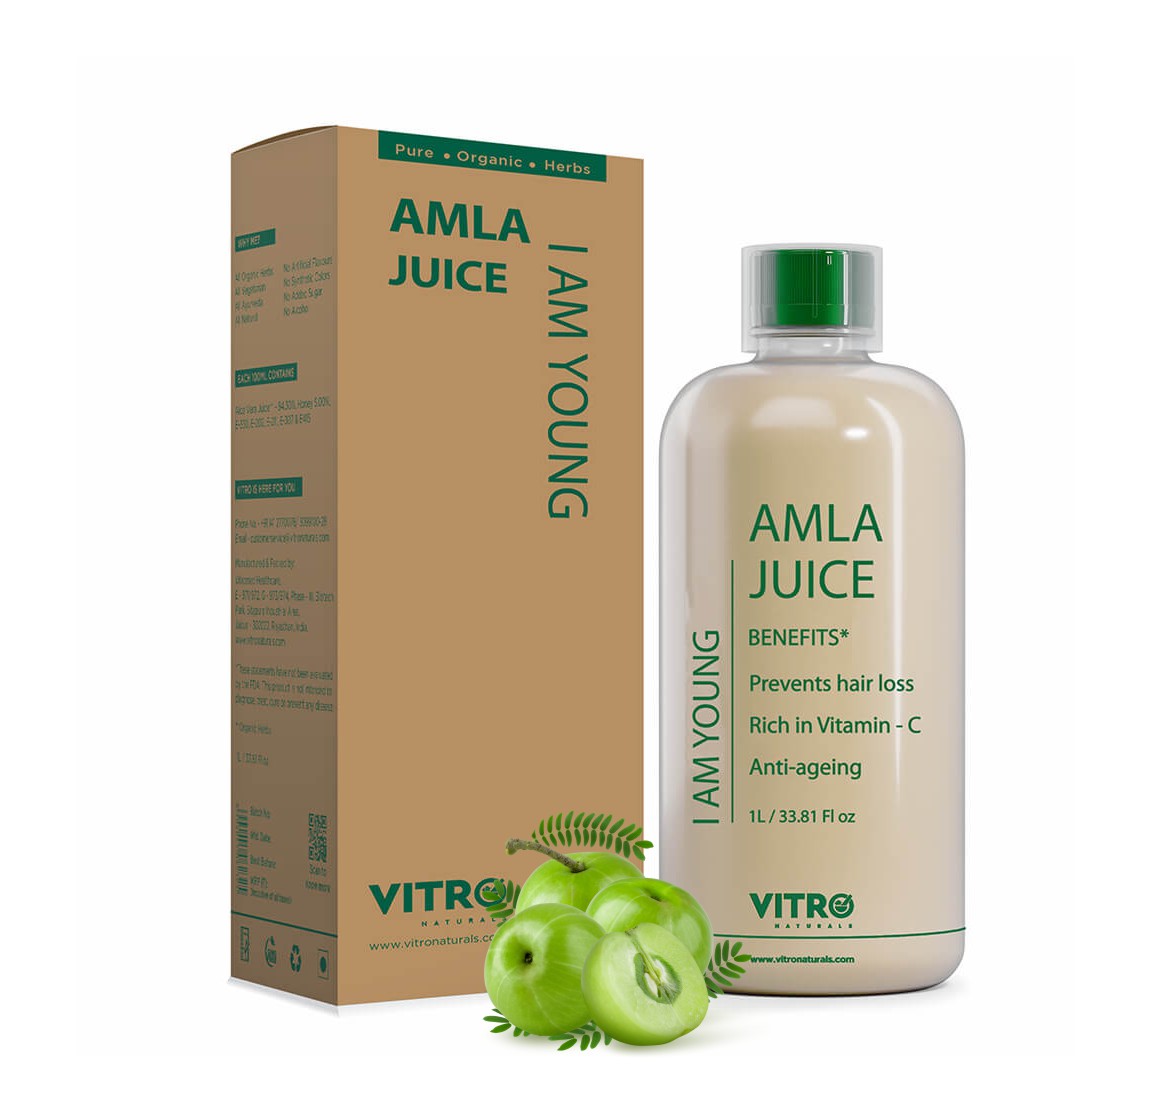 Buy Amla Juice Online in India at best price from Jivacom